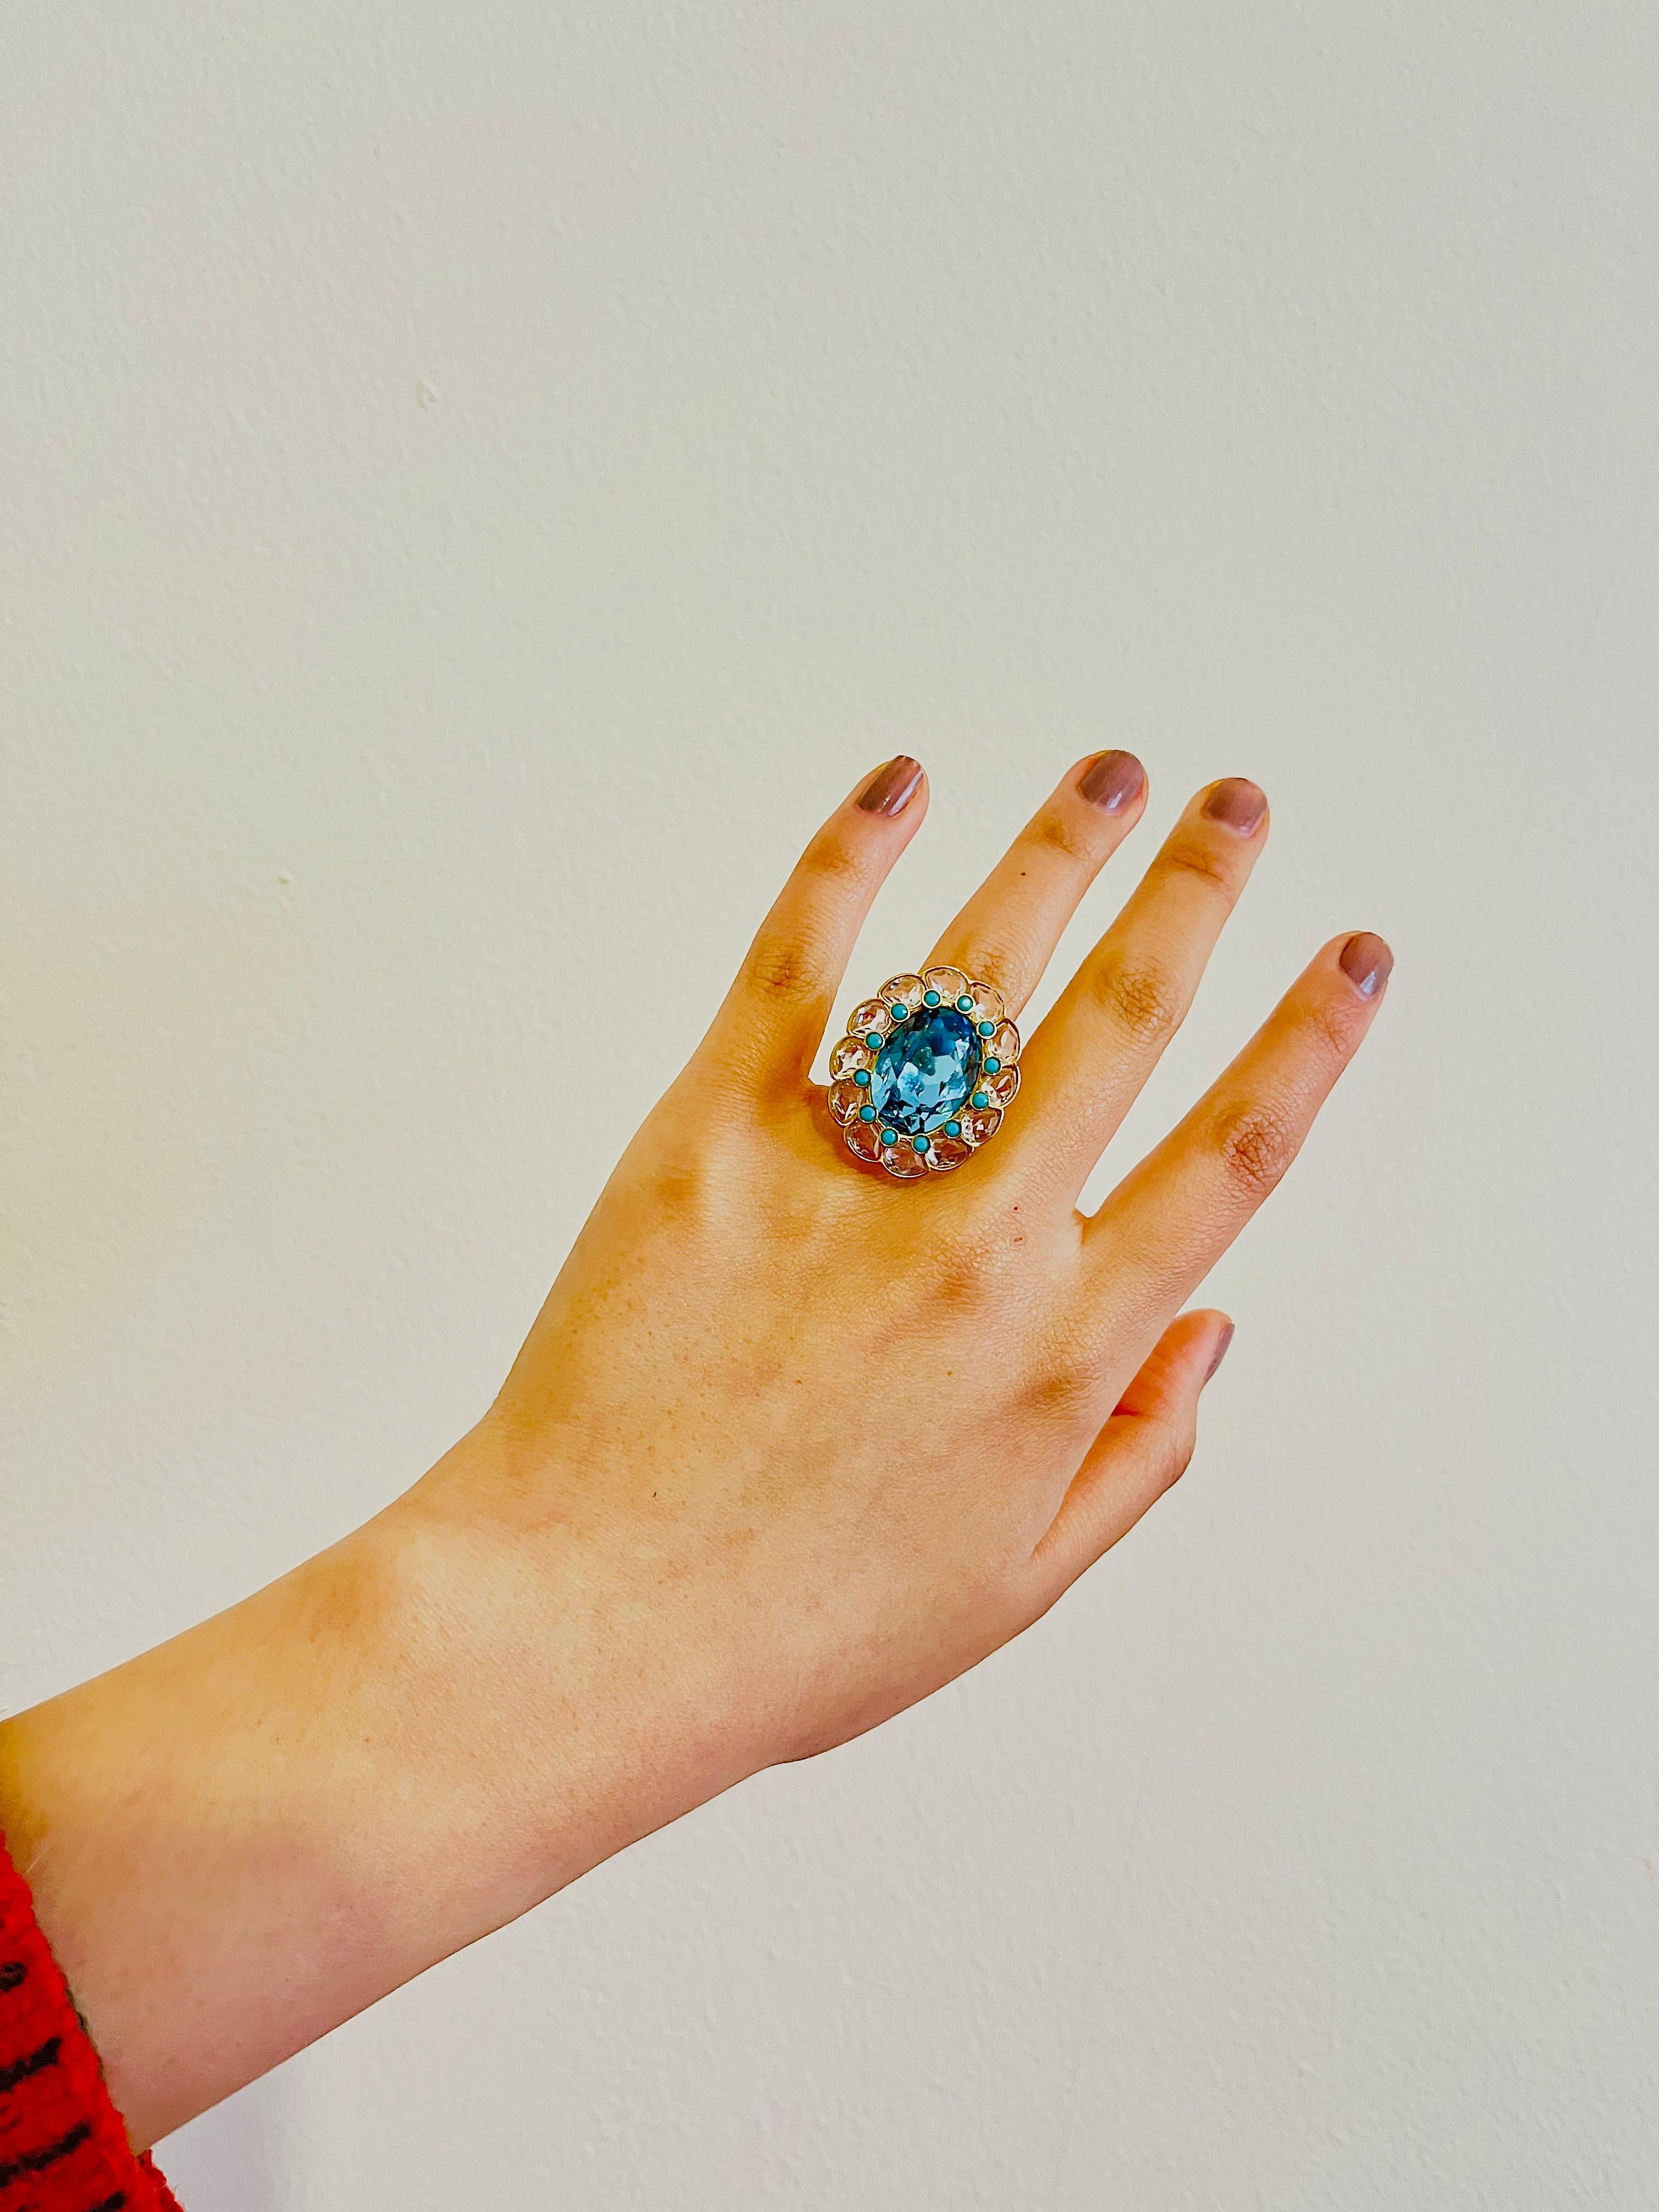 Swarovski Azore Blue Crystals Dots Clear Large Flower Cocktail Ring Size L 52 In Excellent Condition For Sale In Wokingham, England